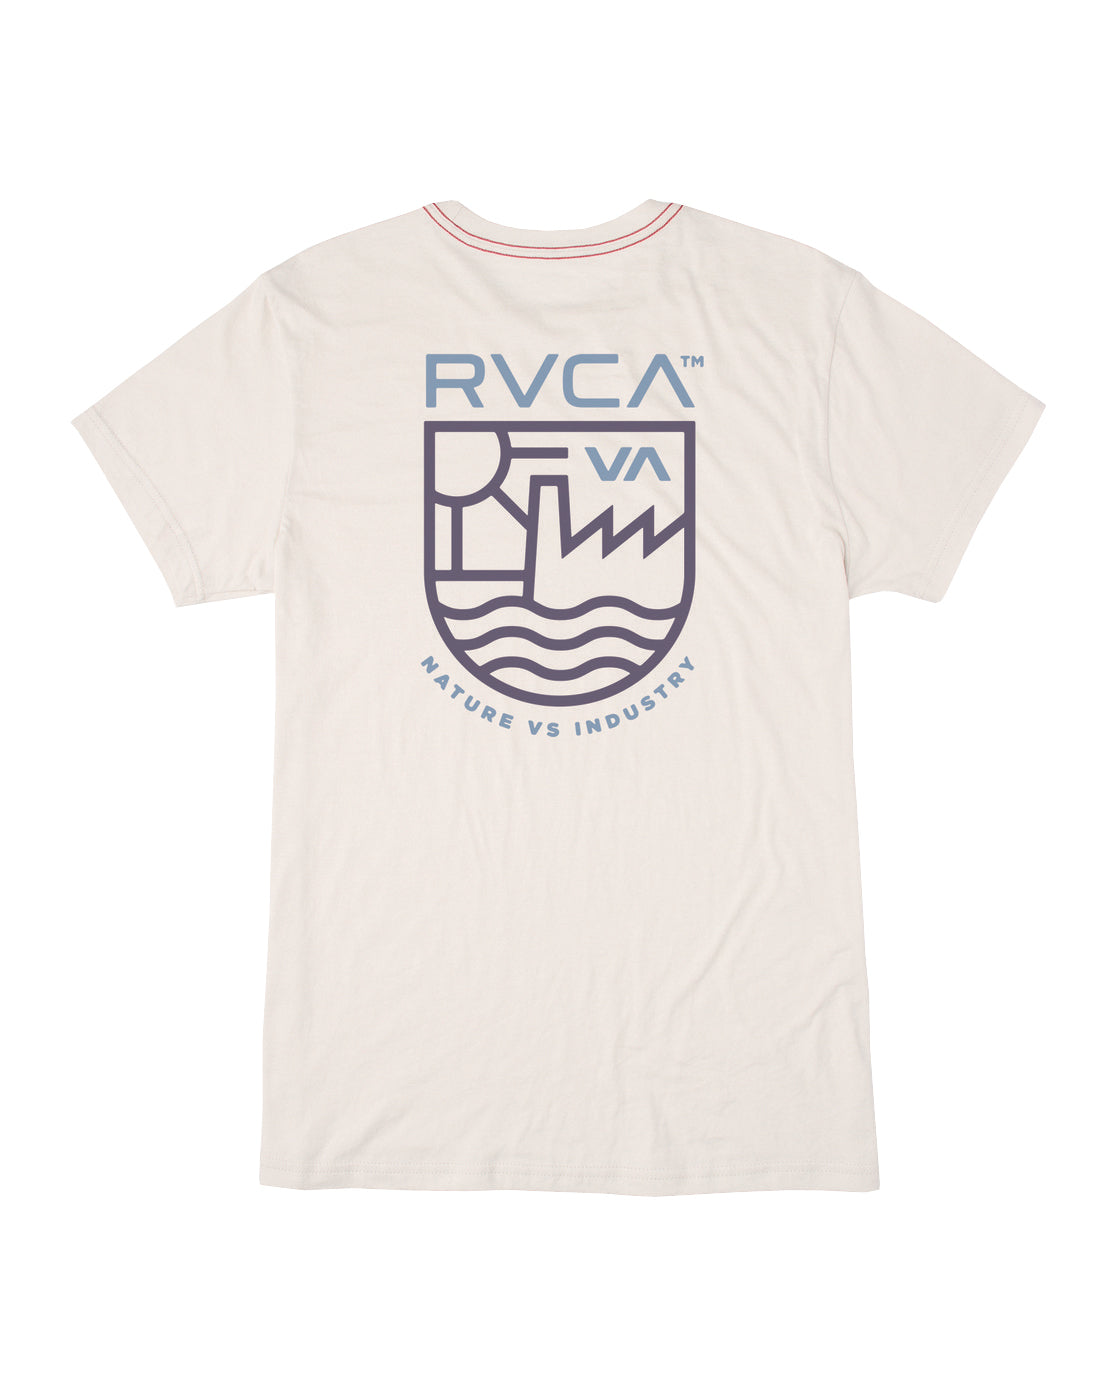 RVCA Dept of Ind SS Tee ANW L